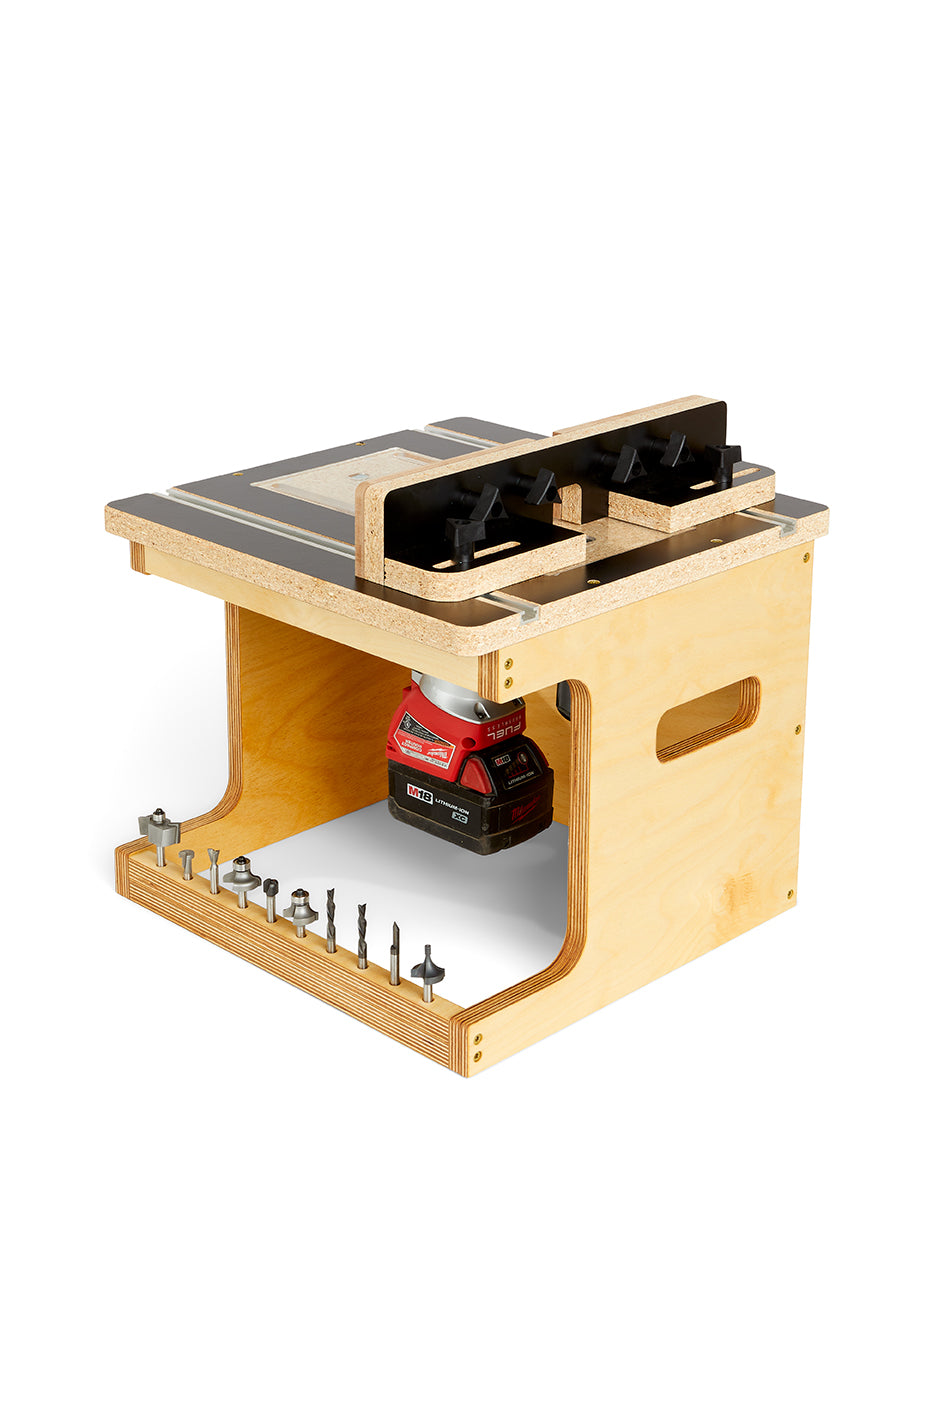 Compact Woodworking Router Table Plan